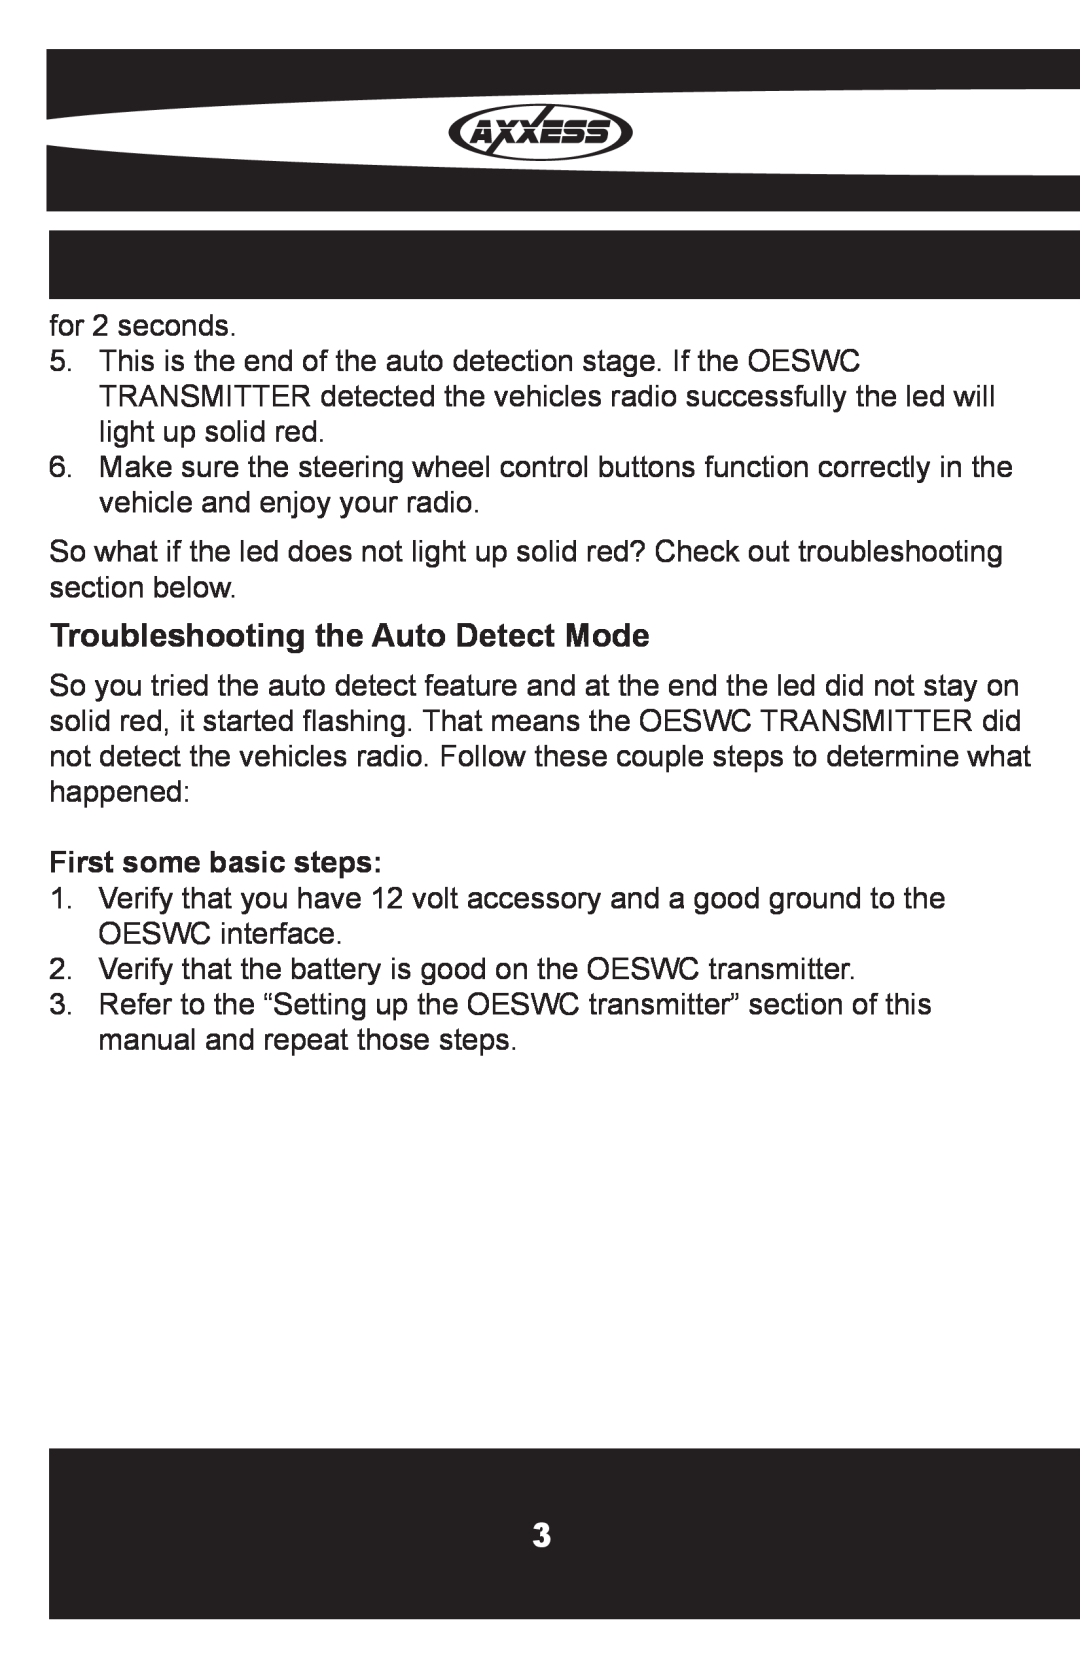 Axxess Interface OESWC-CLASS2-RF installation instructions Troubleshooting the Auto Detect Mode, First some basic steps 